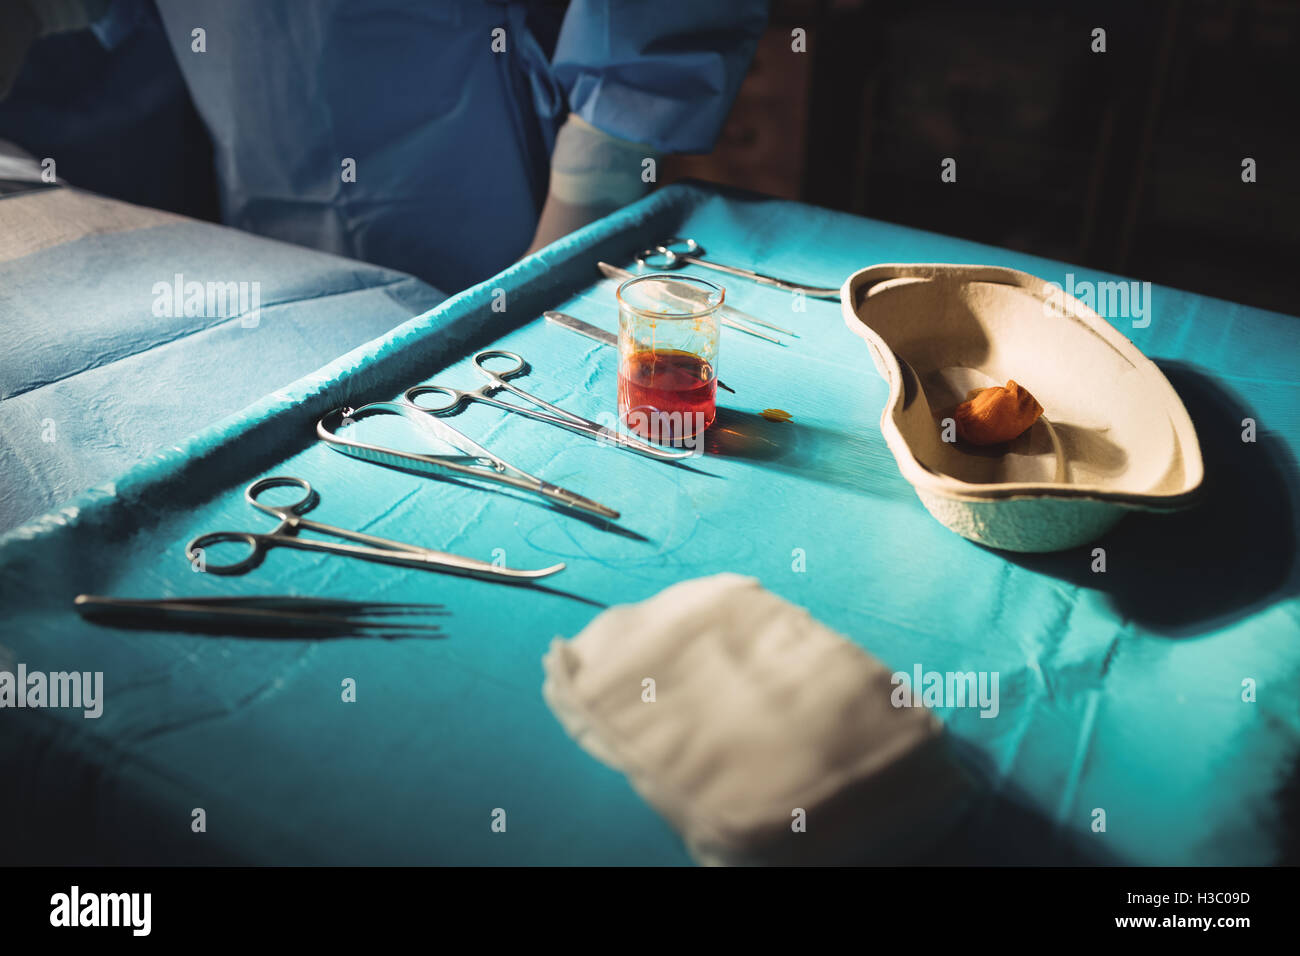 Surgical tools on surgical tray in operation room Stock Photo